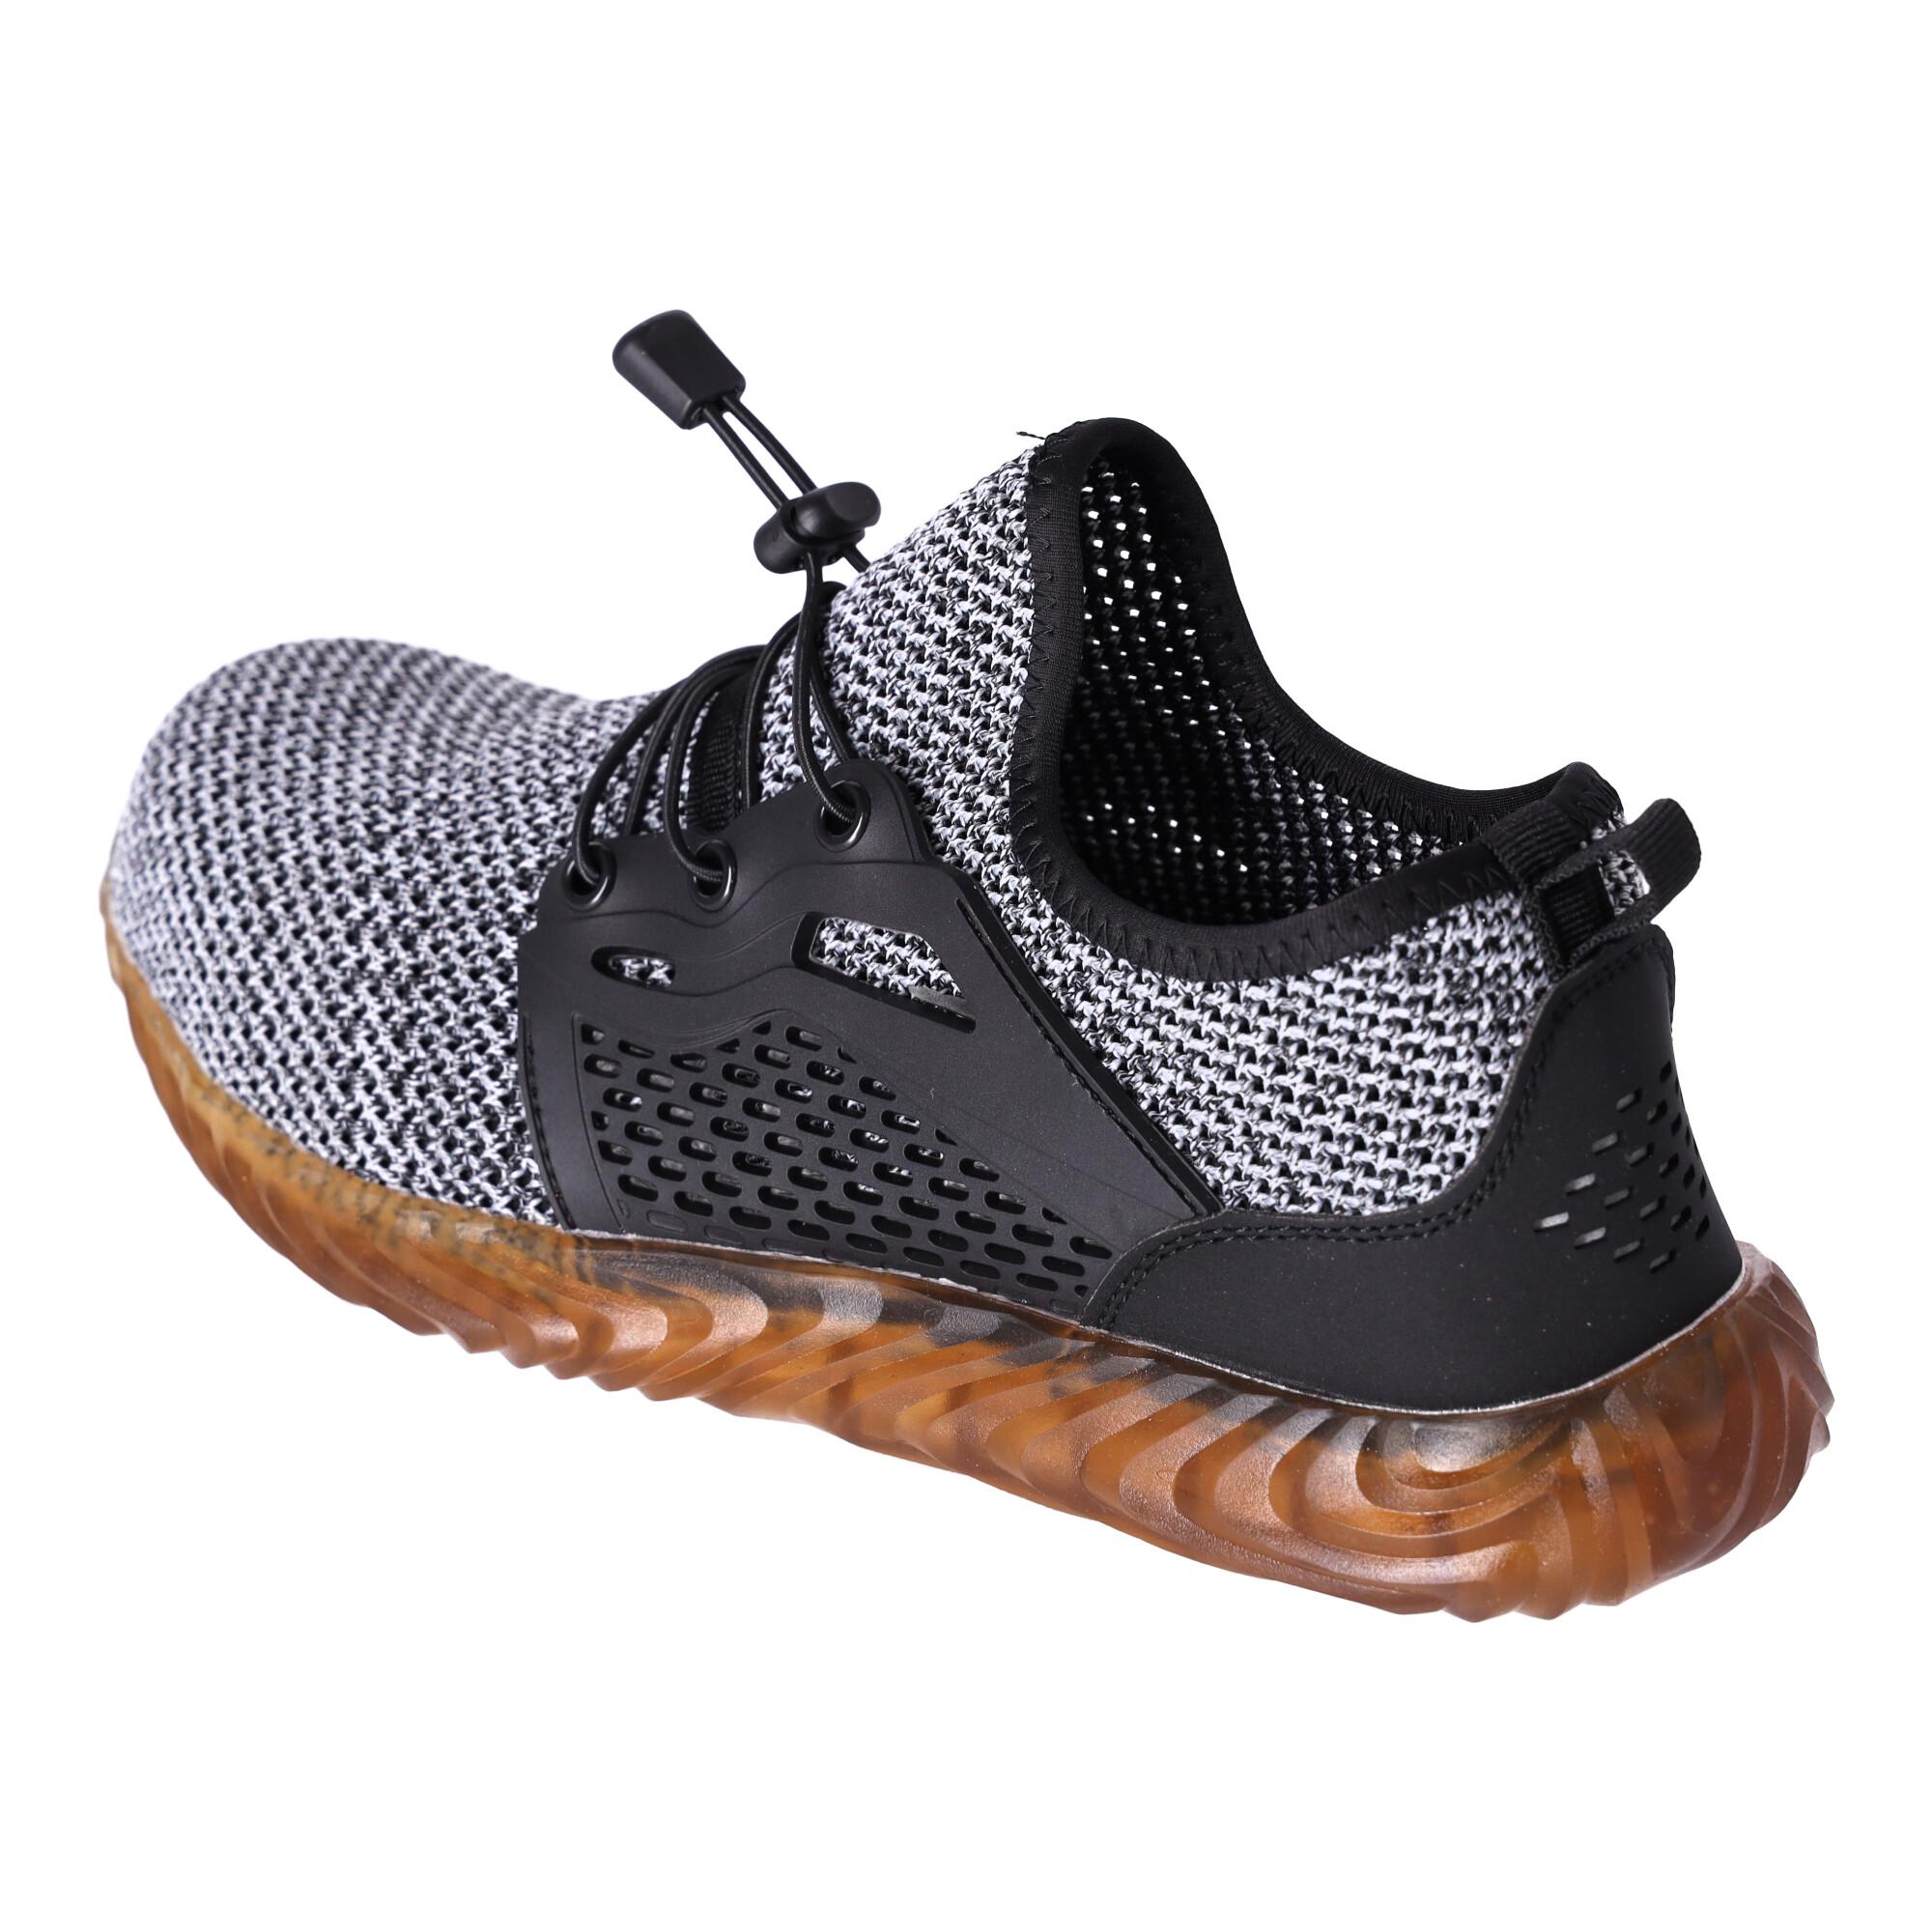 " Work safety shoes Soft "46 - gray